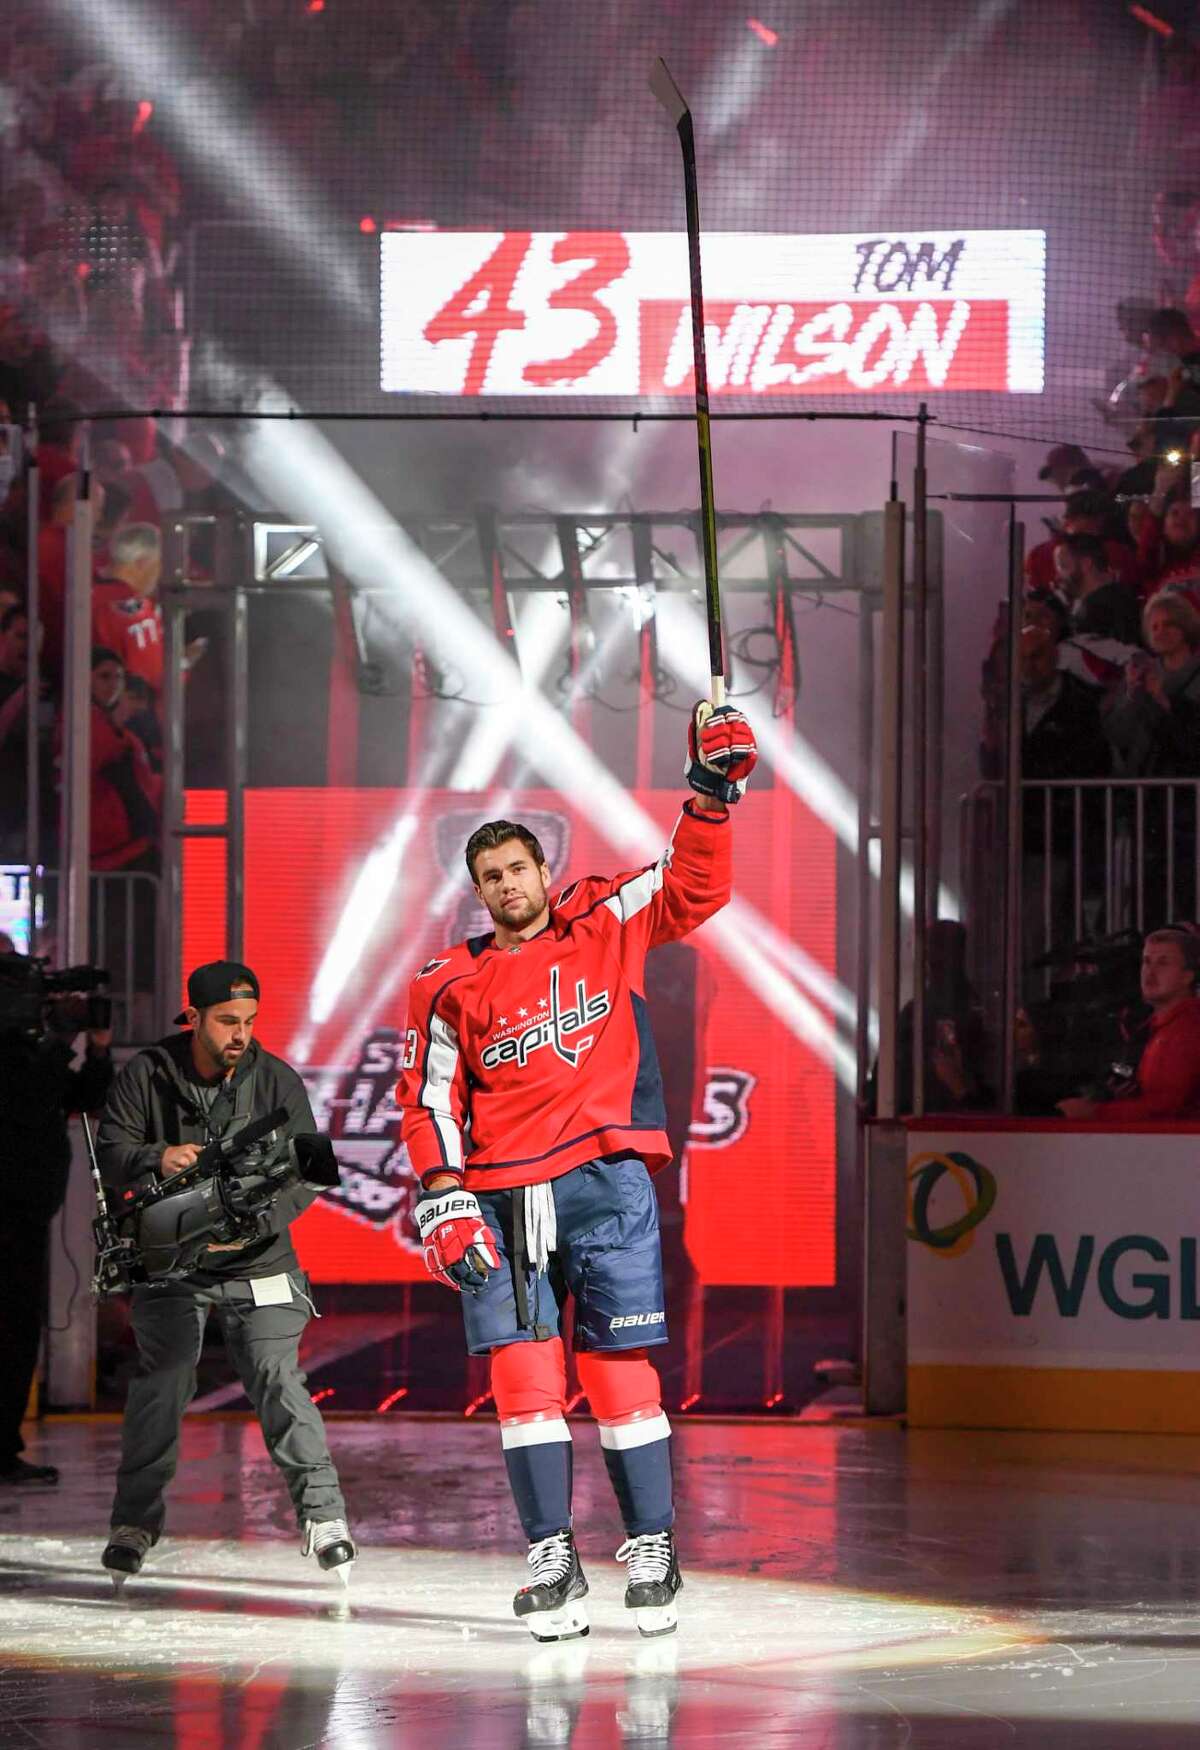 Tom Wilson was on hand Wednesday night for the Washington Capitals' banner-raising ceremony. Wilson was banned 20 games by the NHL for a blindside hit to the head of an opponent during a preseason game.